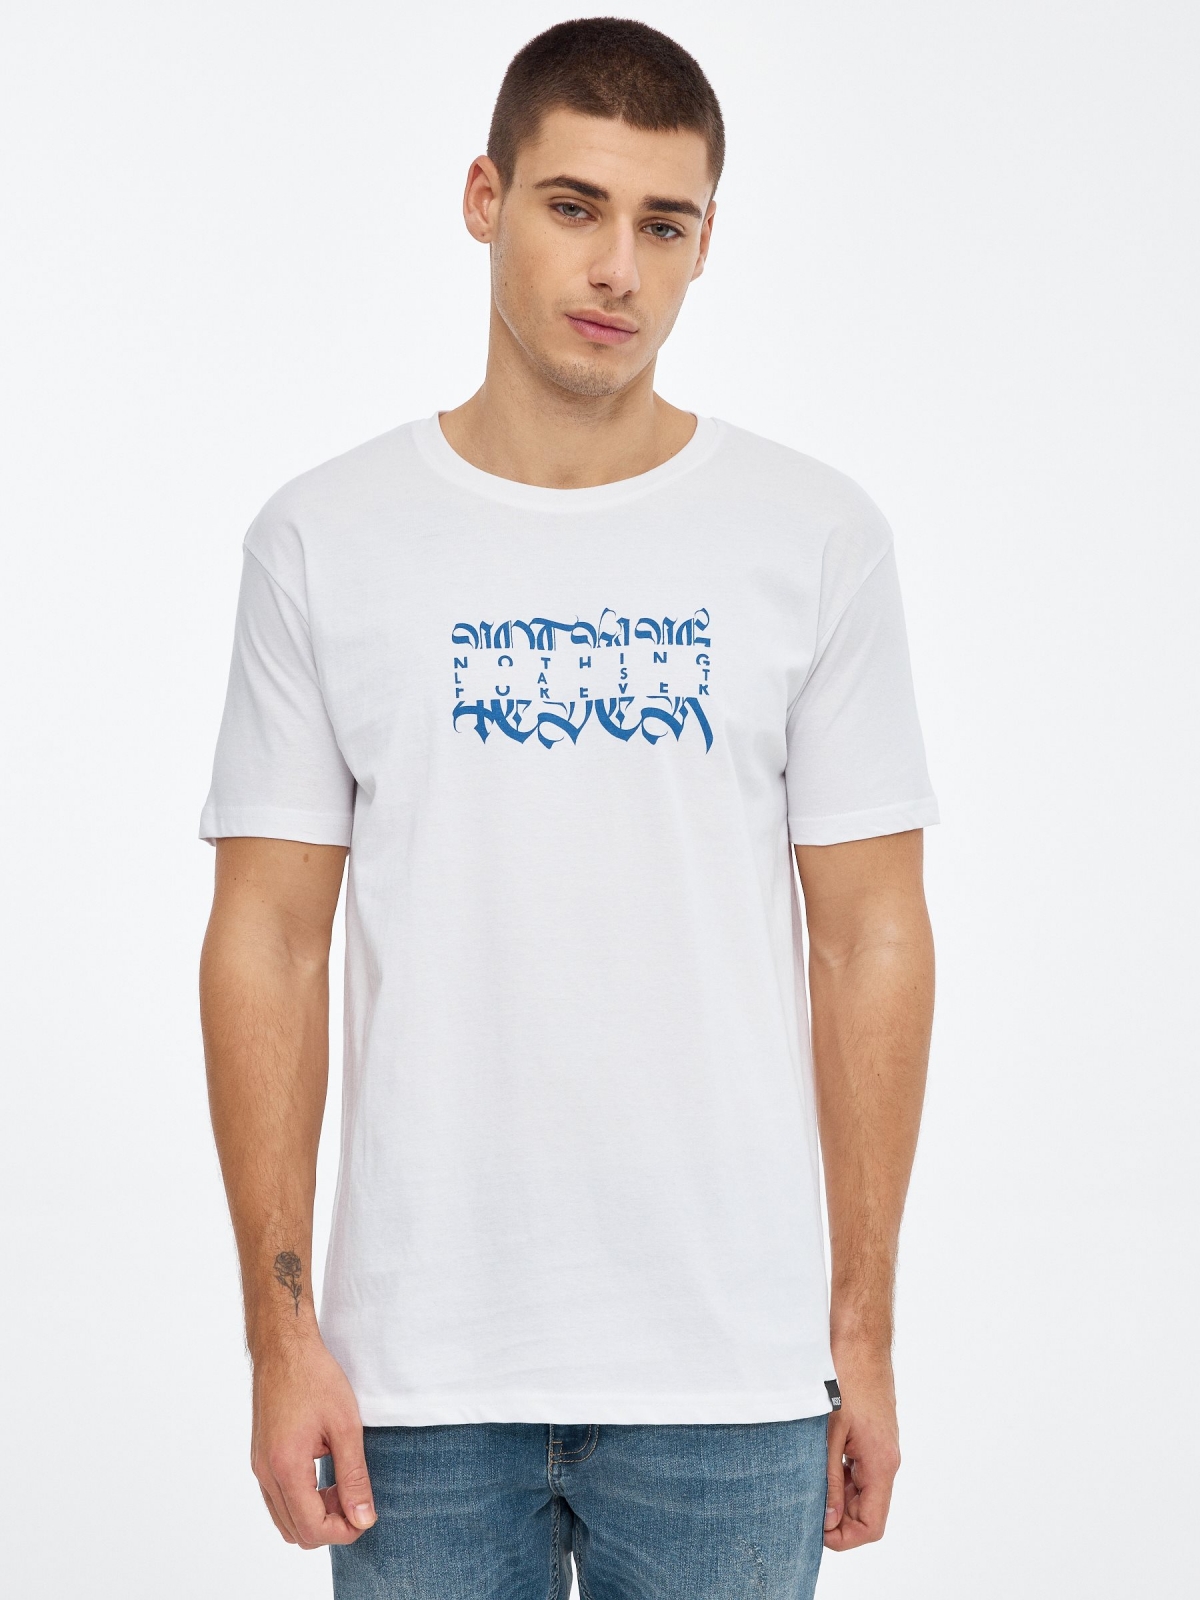 Printed t-shirt white middle front view